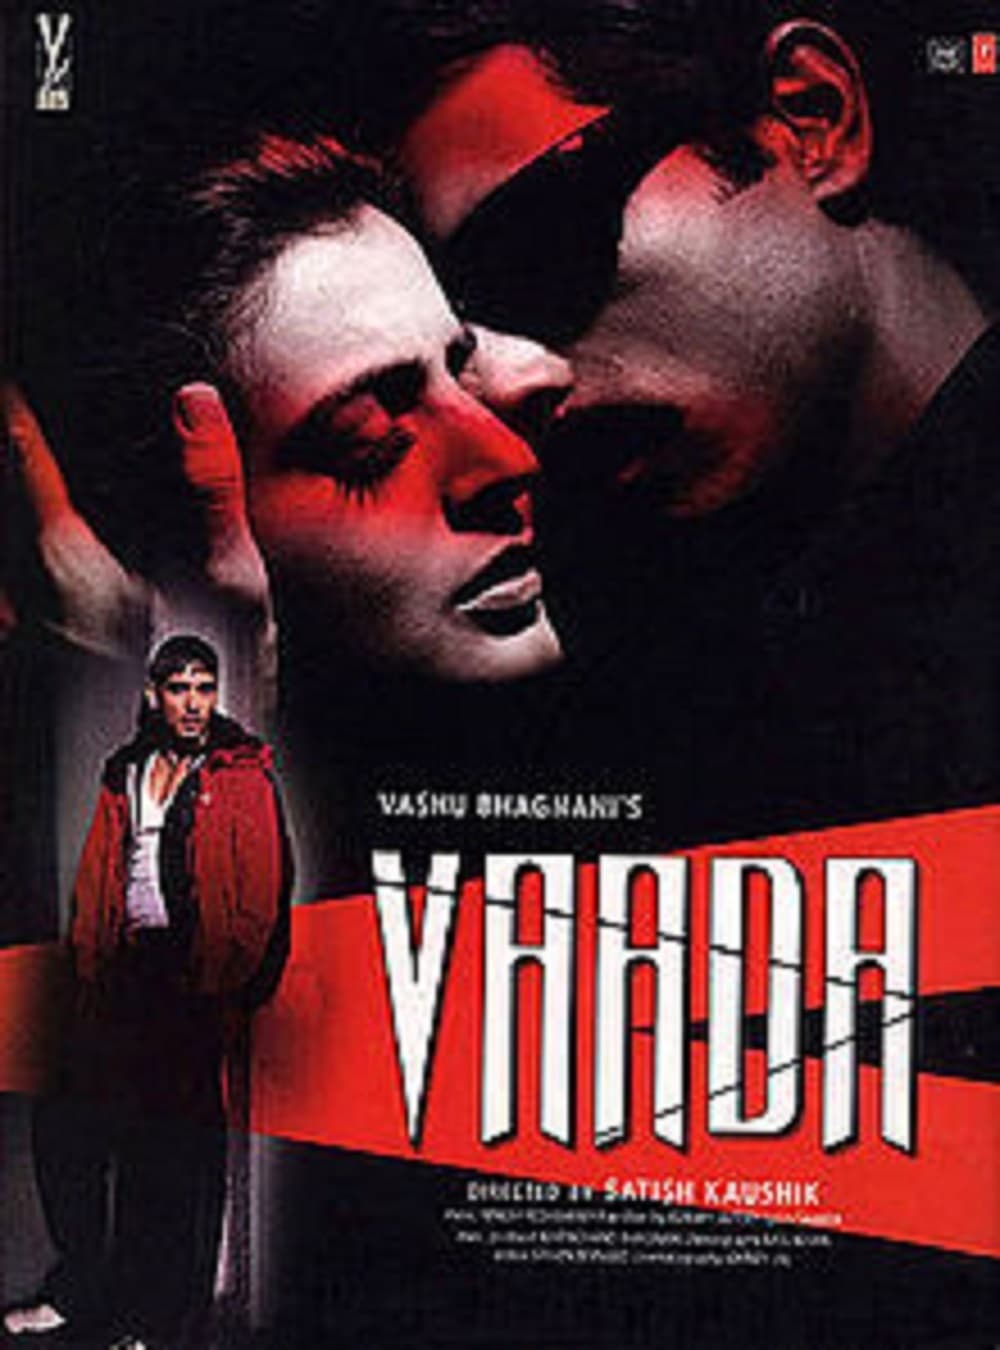 Poster for the movie "Vaada"